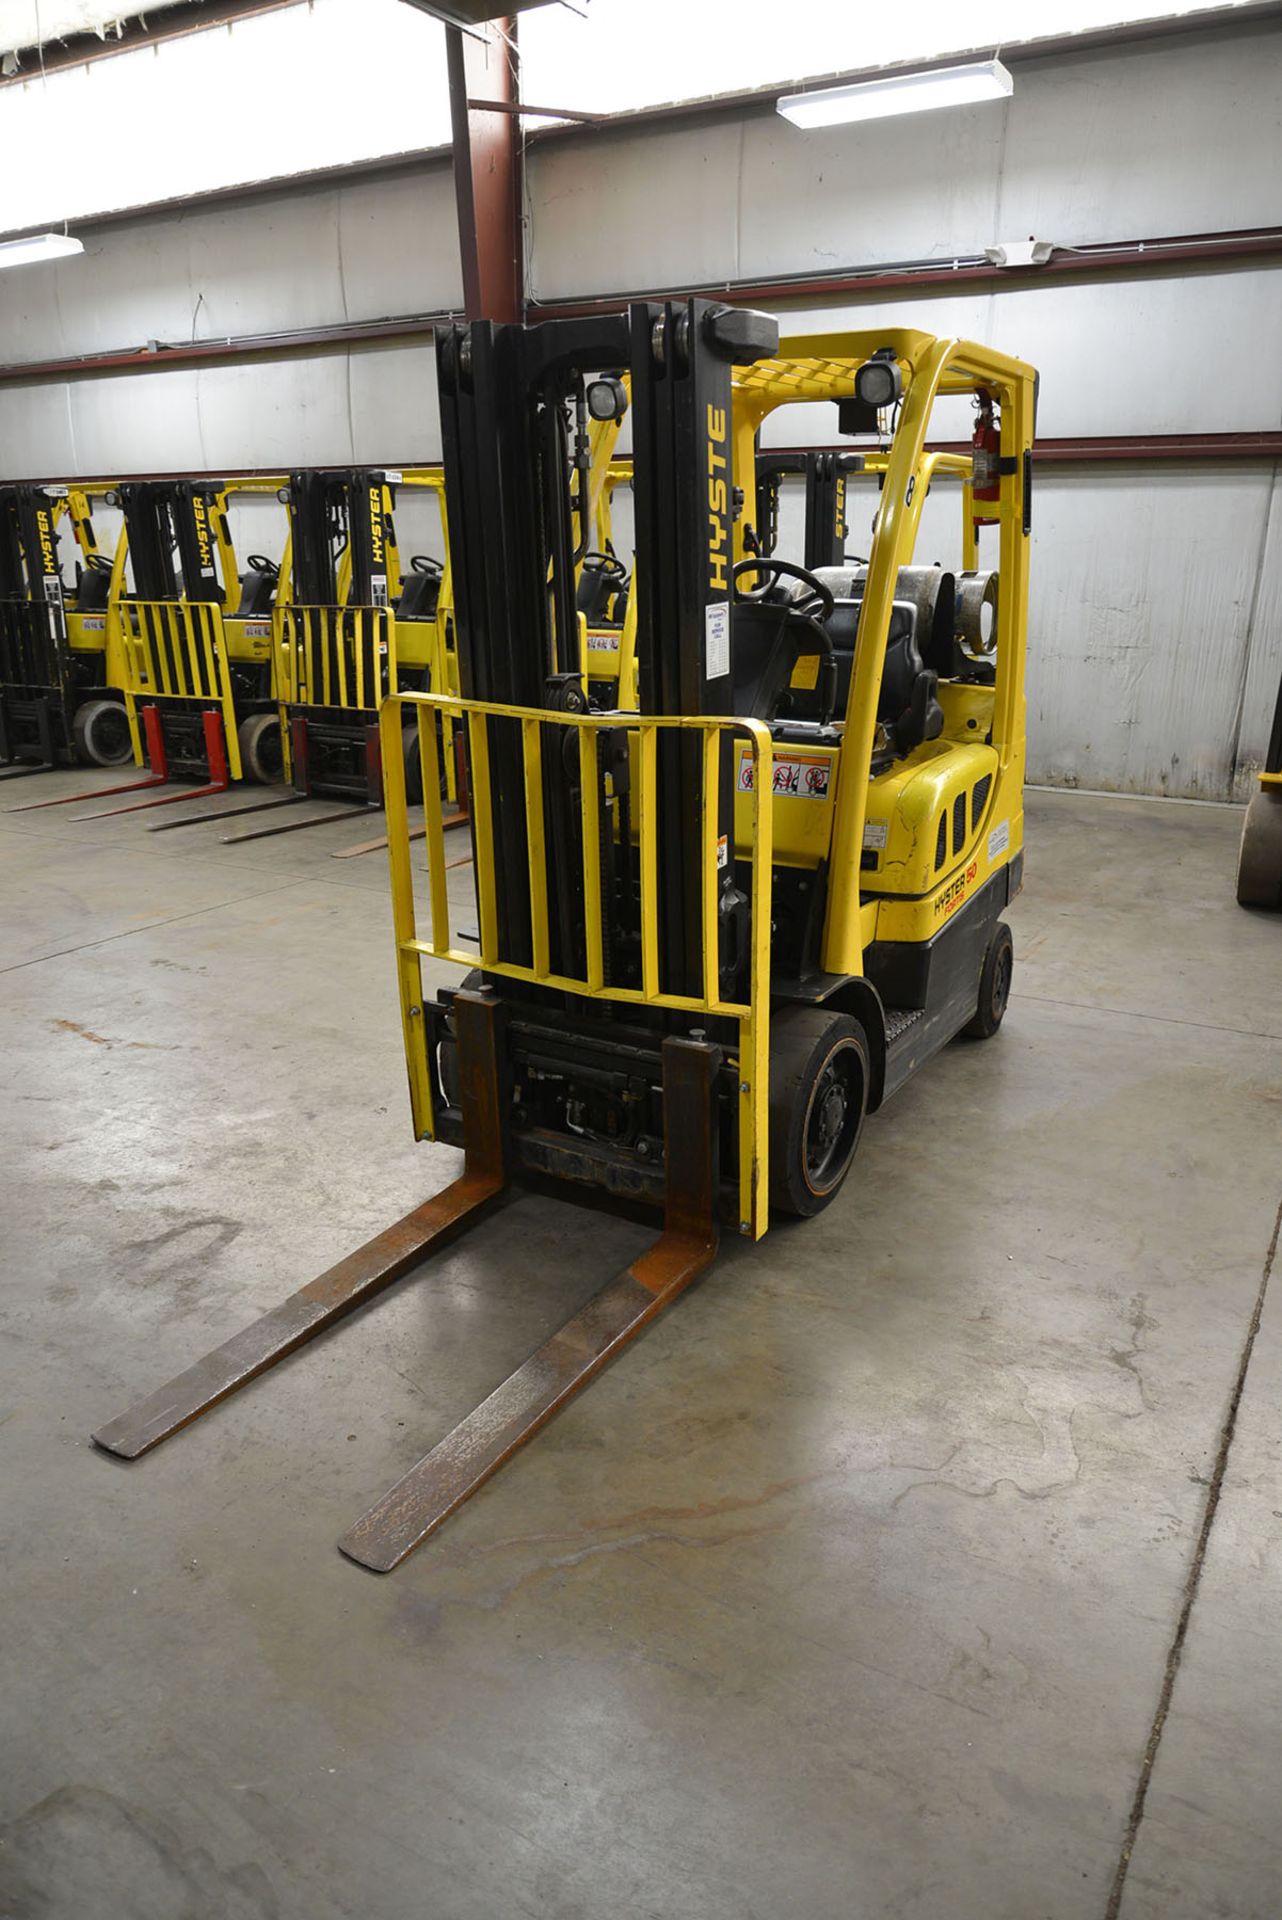 2008 HYSTER 5,000-LB., MODEL: S50FT, SN: F187V11105E, LPG, SOLID TIRES, 3-STAGE MAST, 189'' LIFT - Image 2 of 6